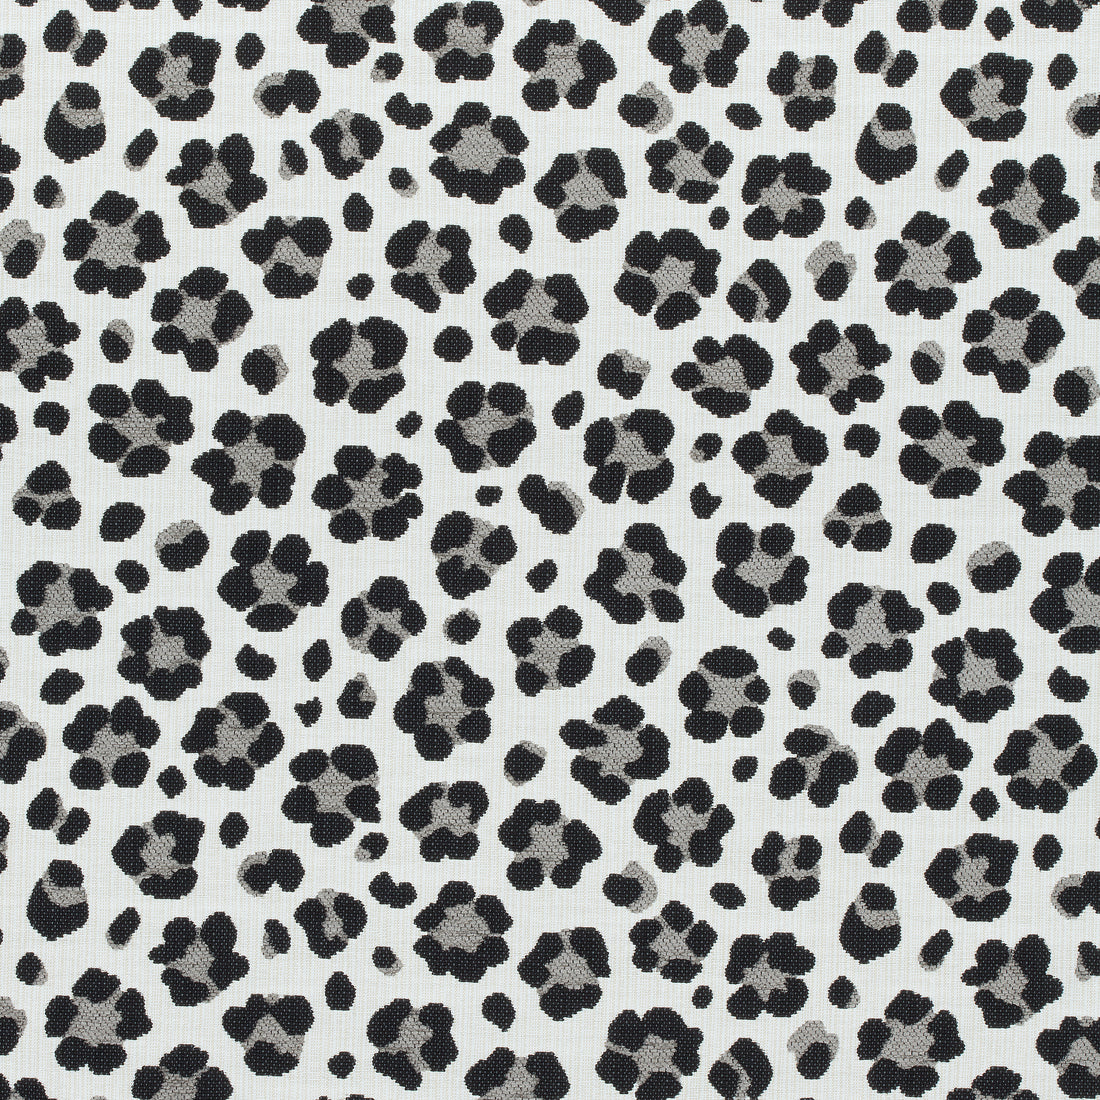 Trixie fabric in black and grey color - pattern number W80420 - by Thibaut in the Woven Resource Vol 10 Menagerie collection